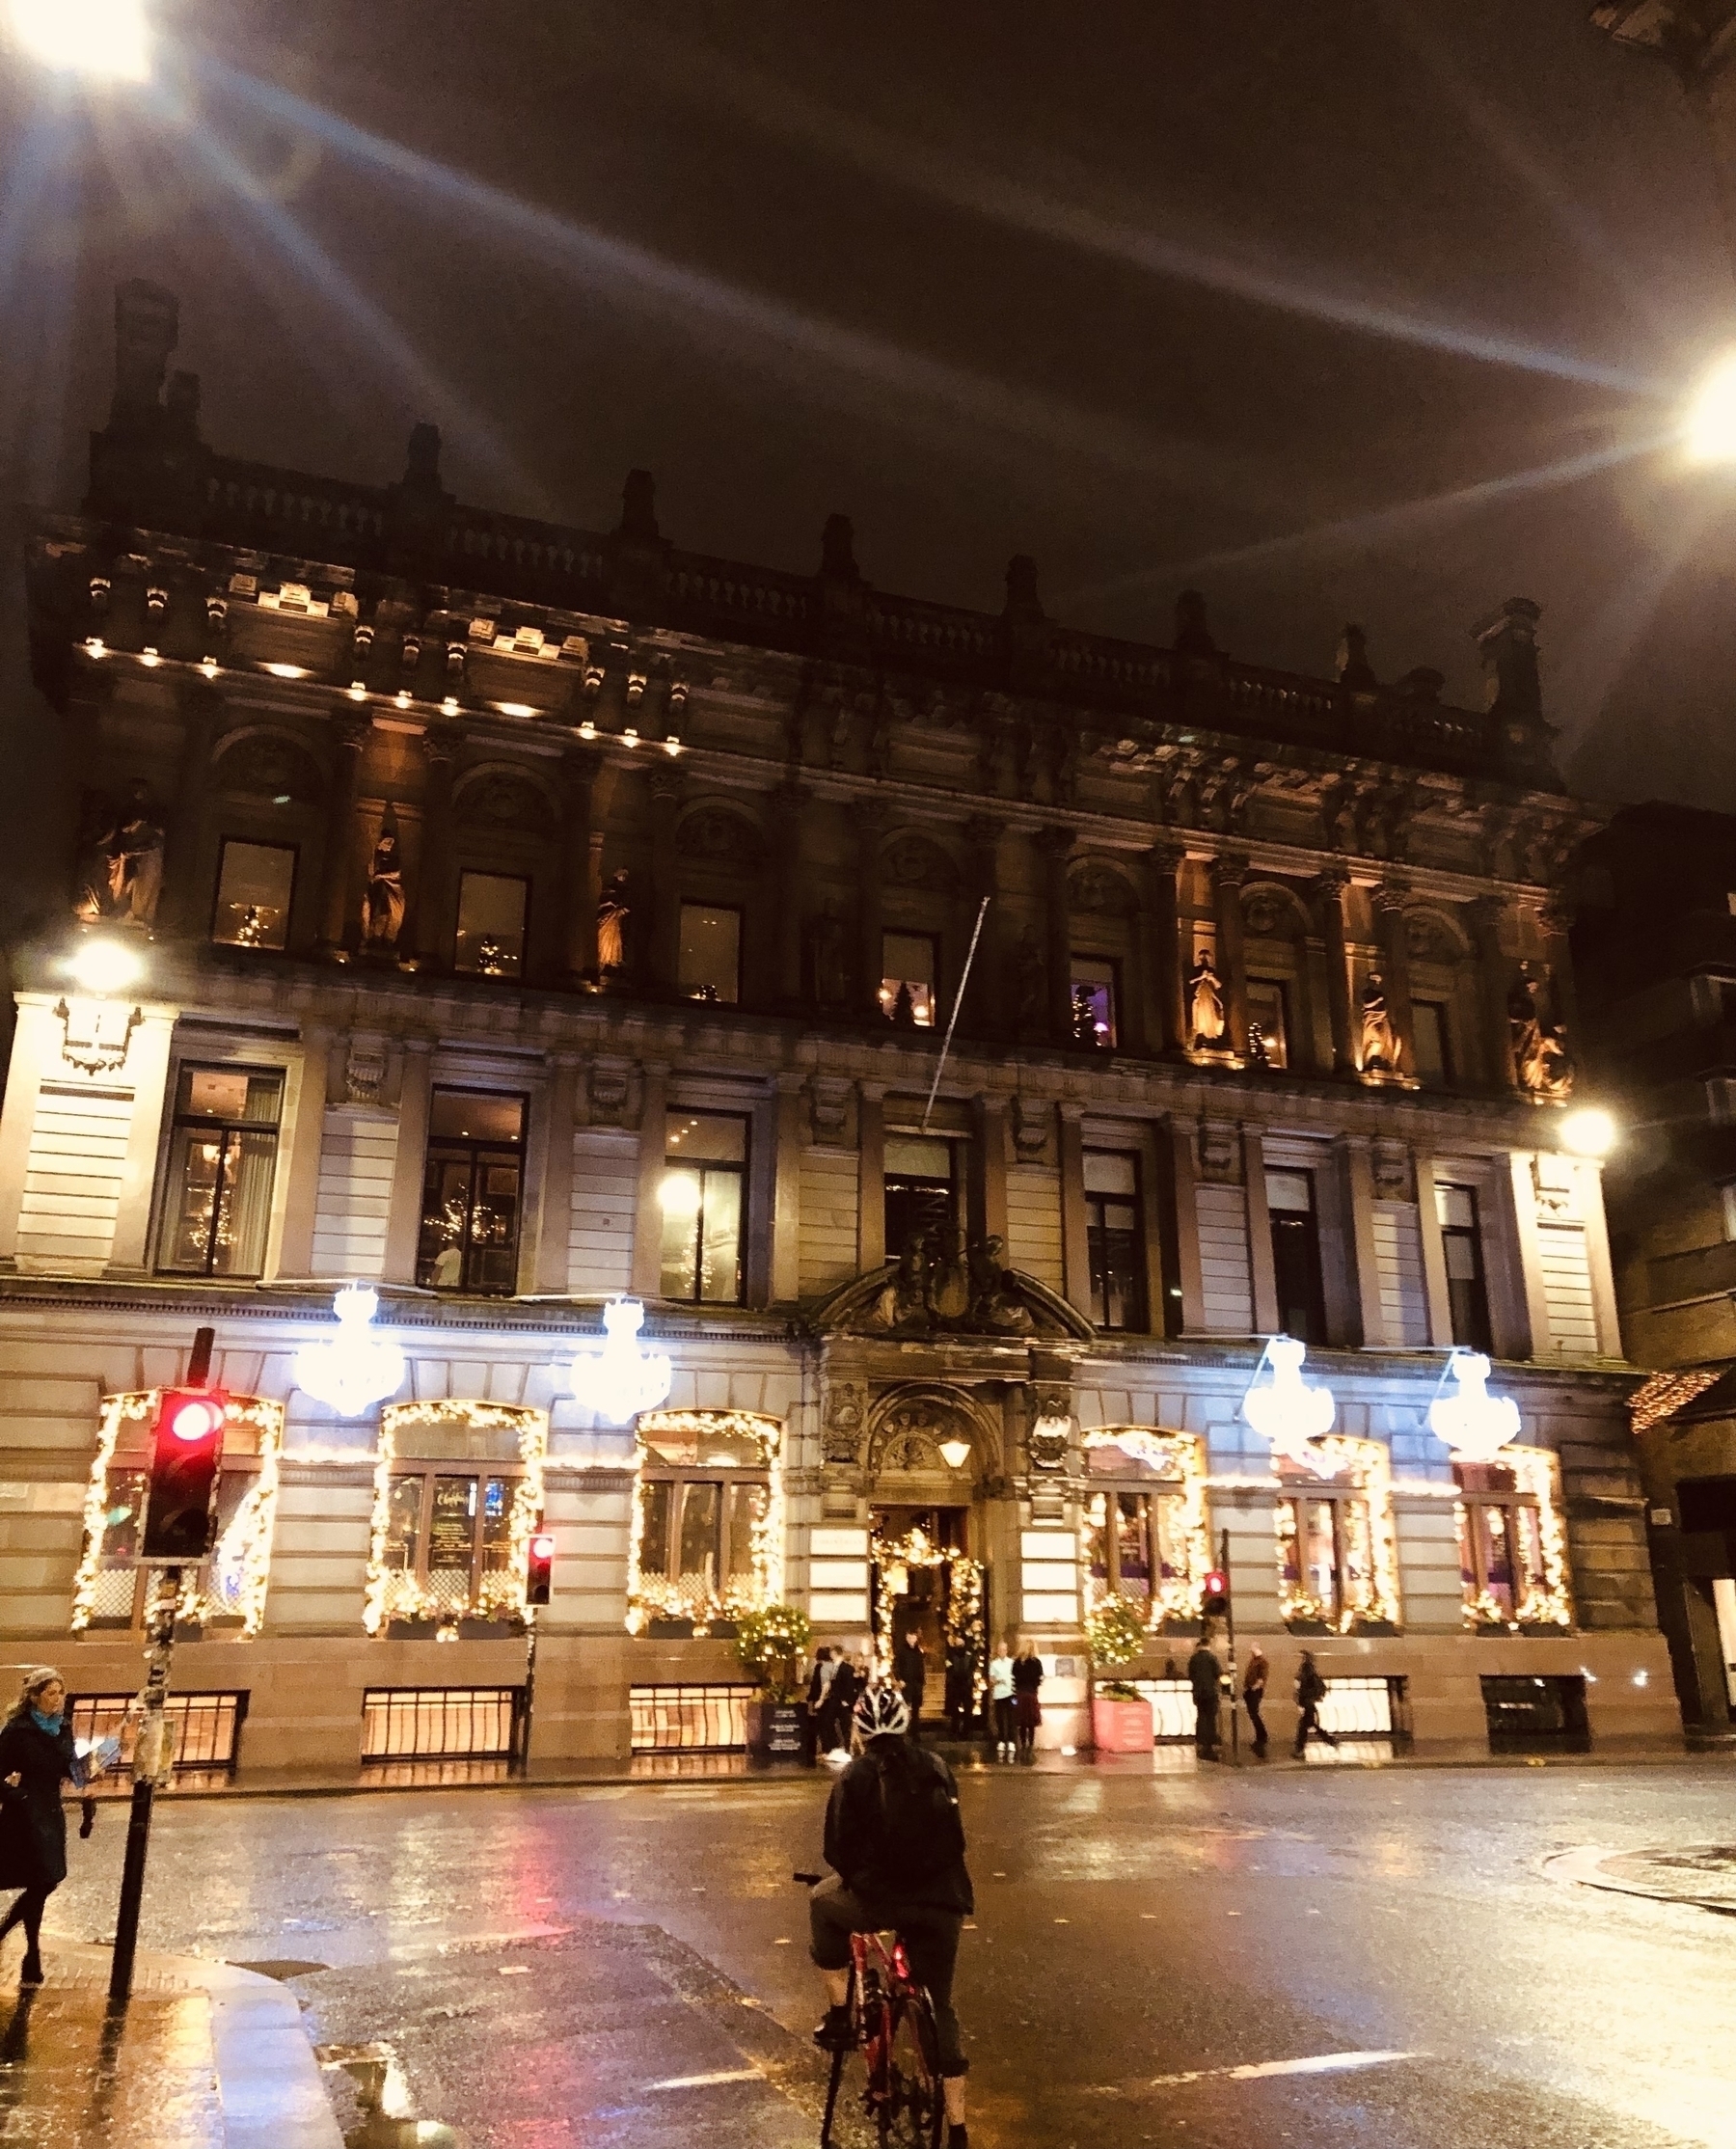 Beautiful Glasgow building at night with Christmas lights